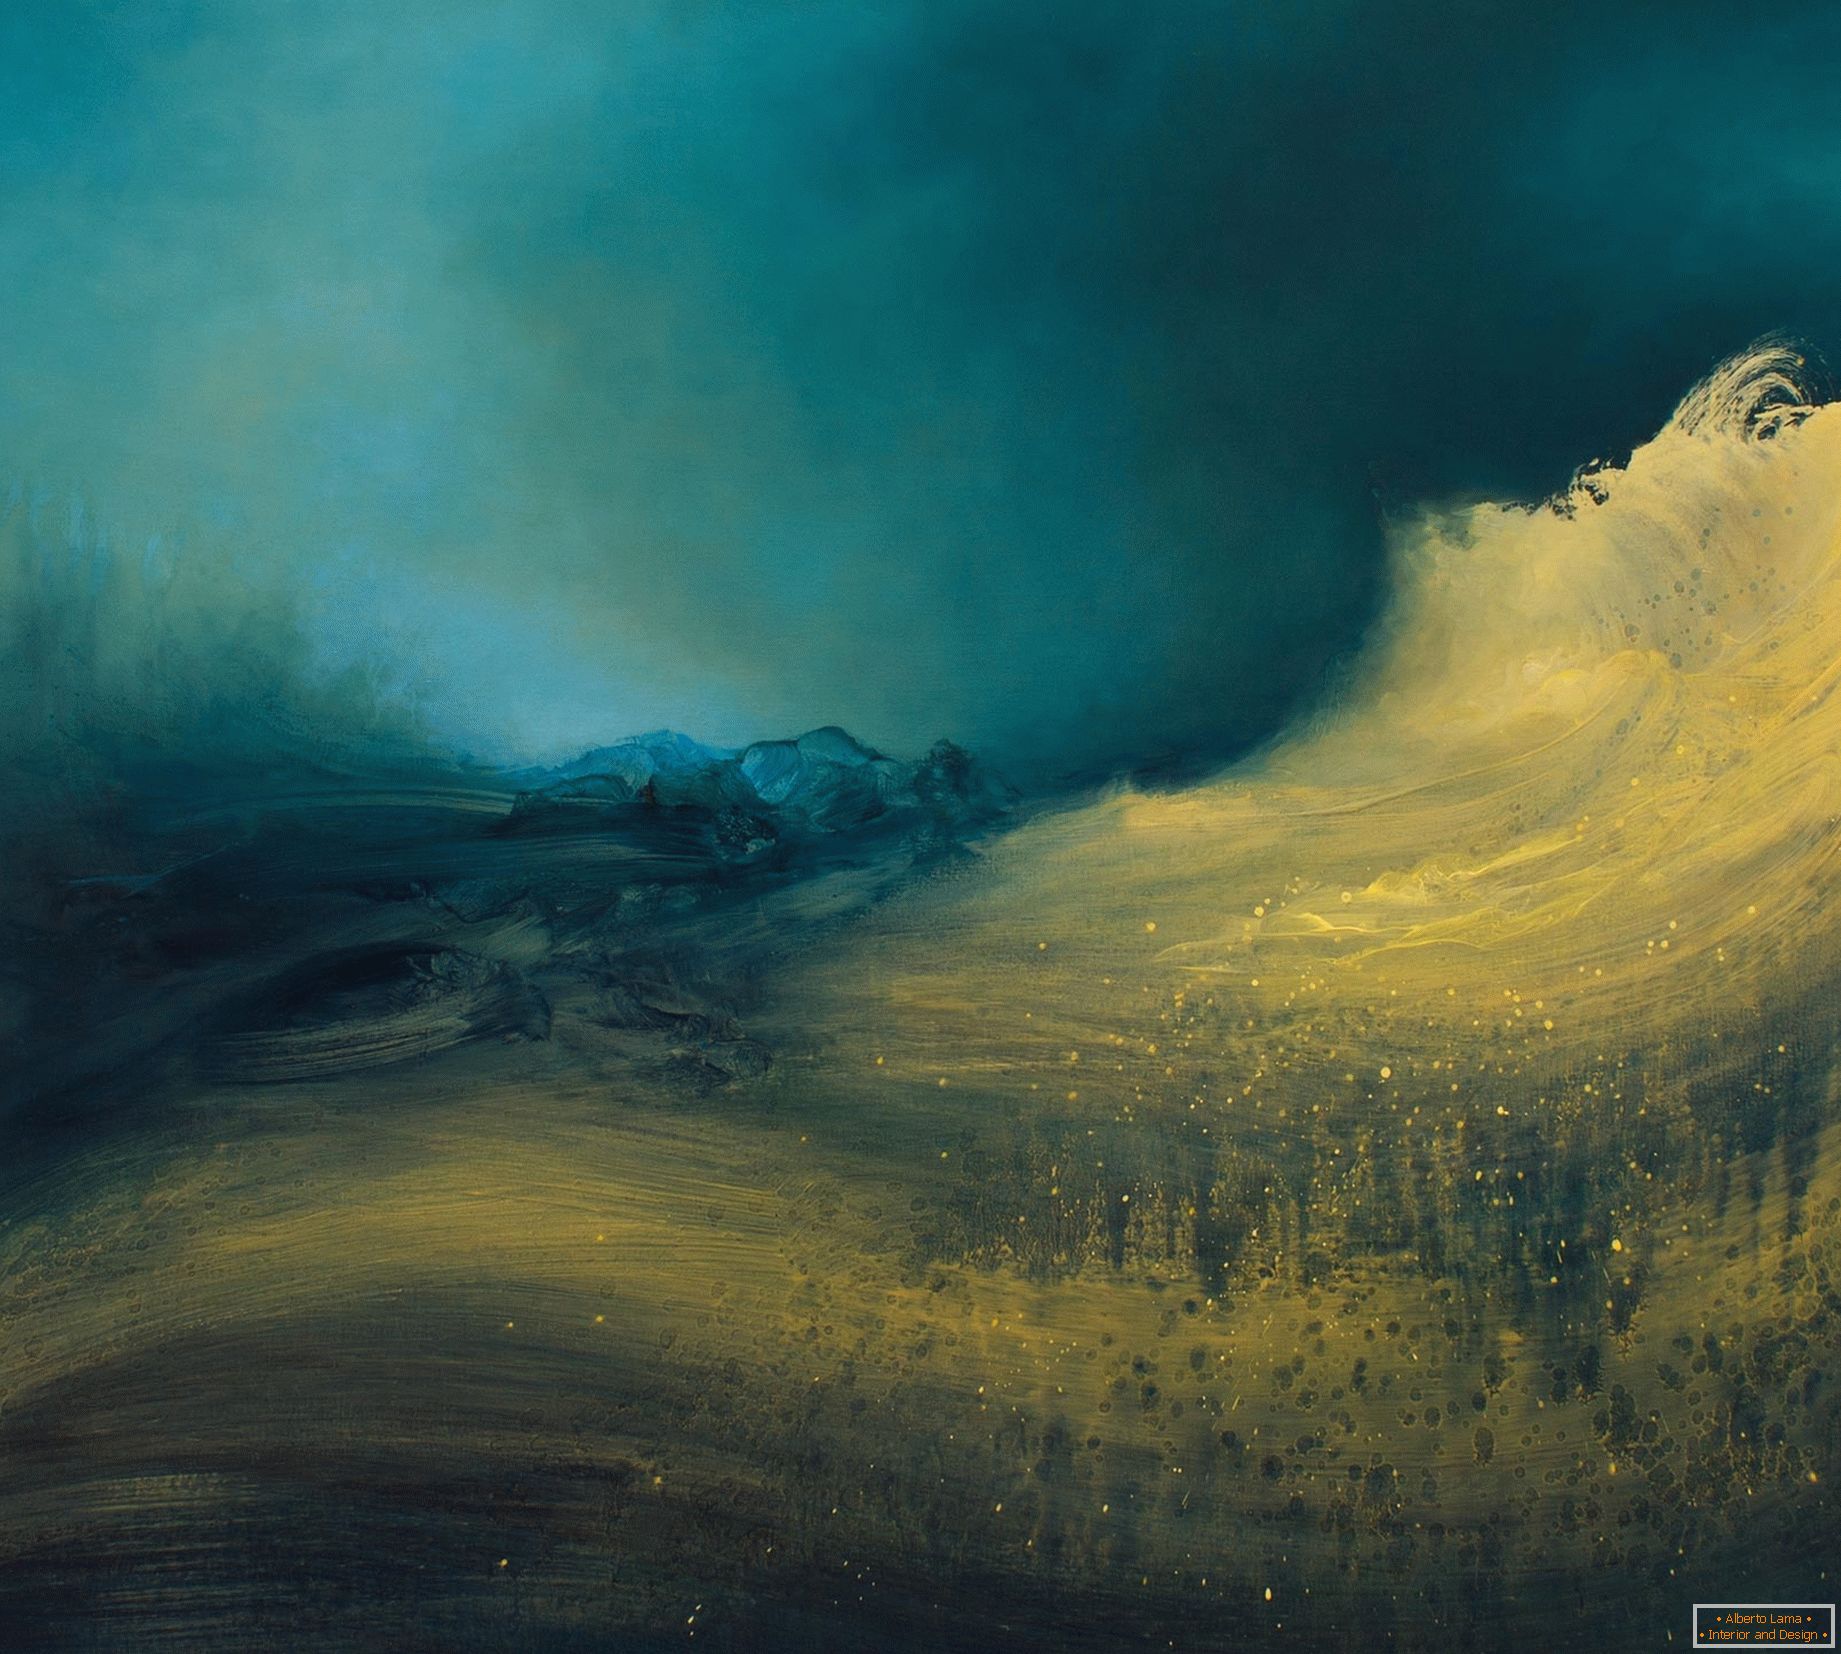 Paysages océaniques abstraits de Samantha Keely Smith